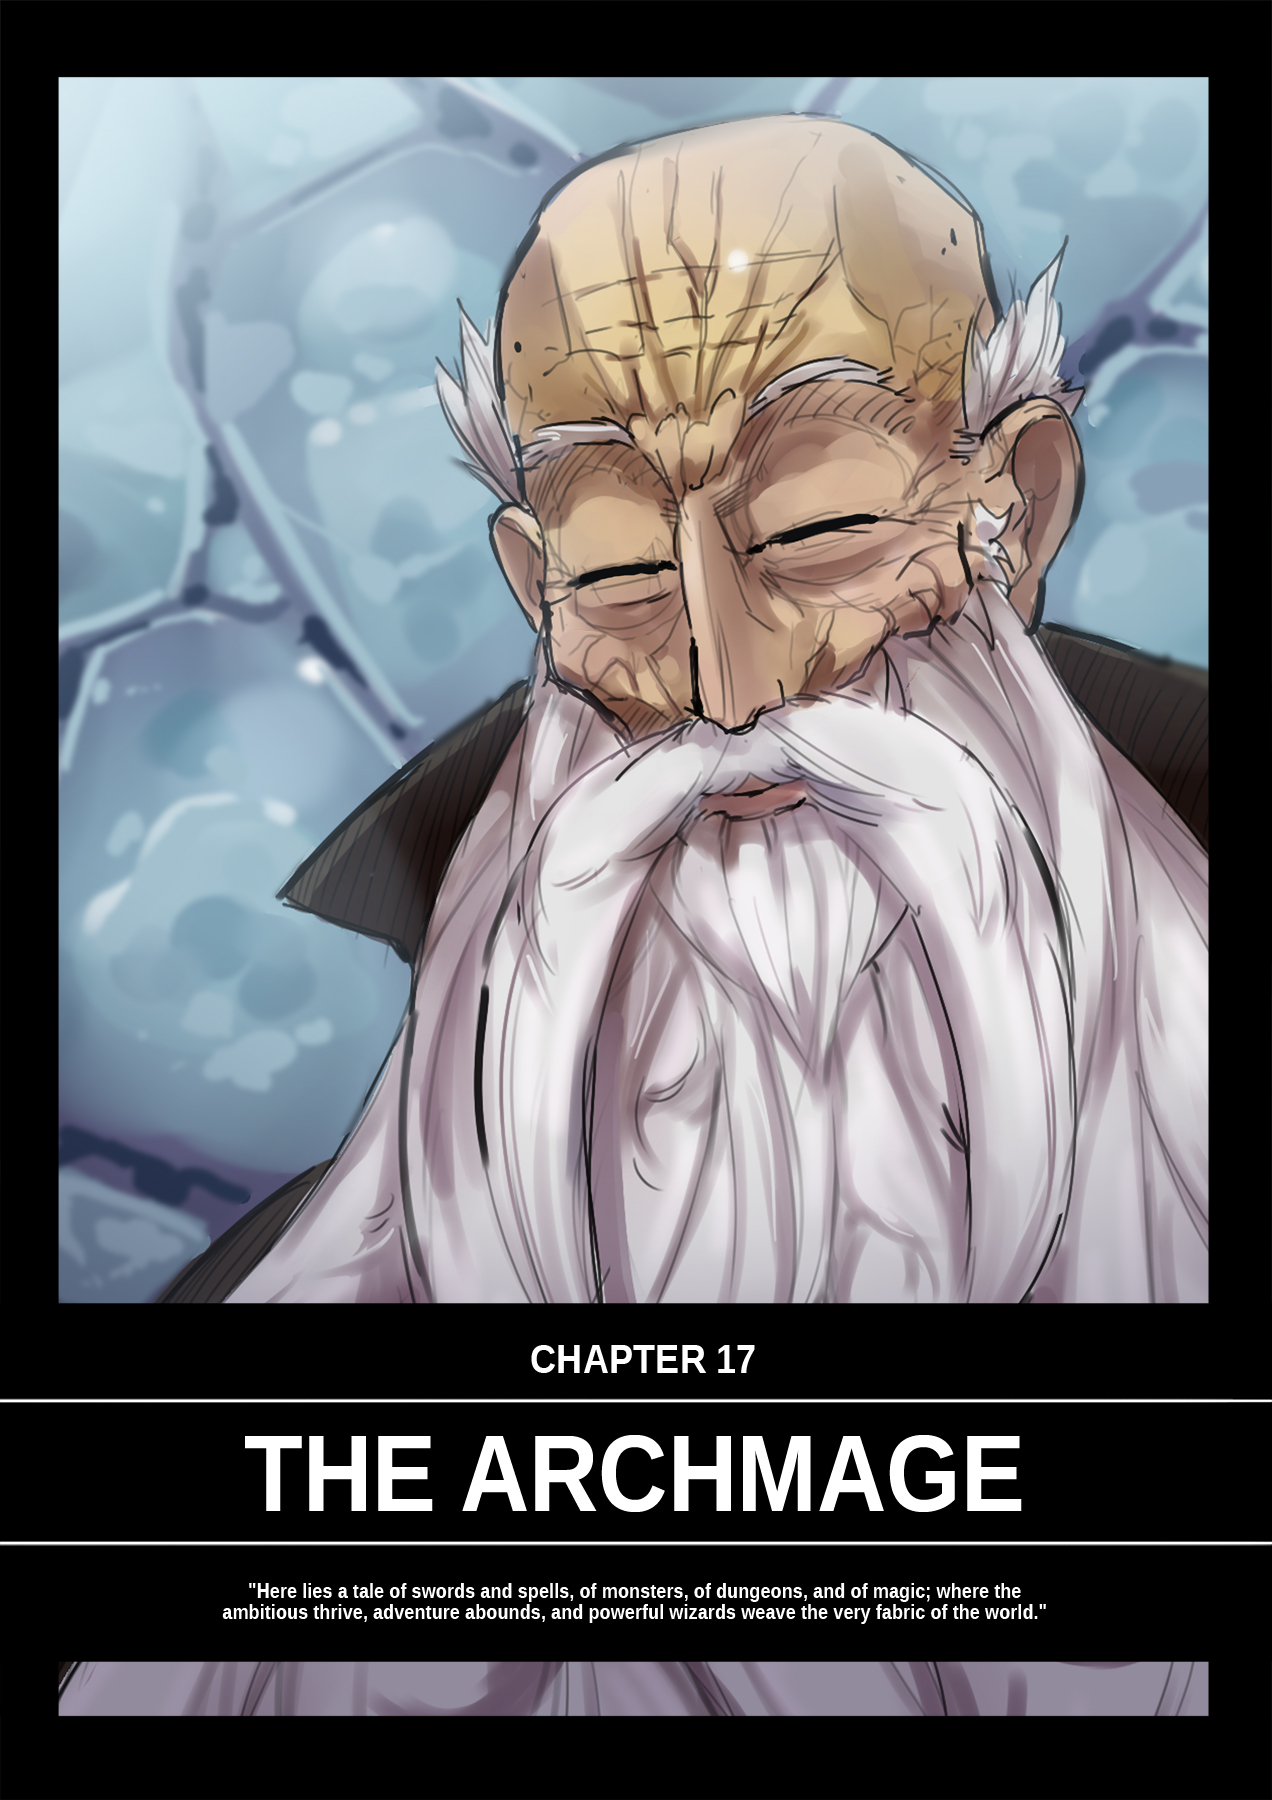 Spellcross Ch. 17 The Archmage